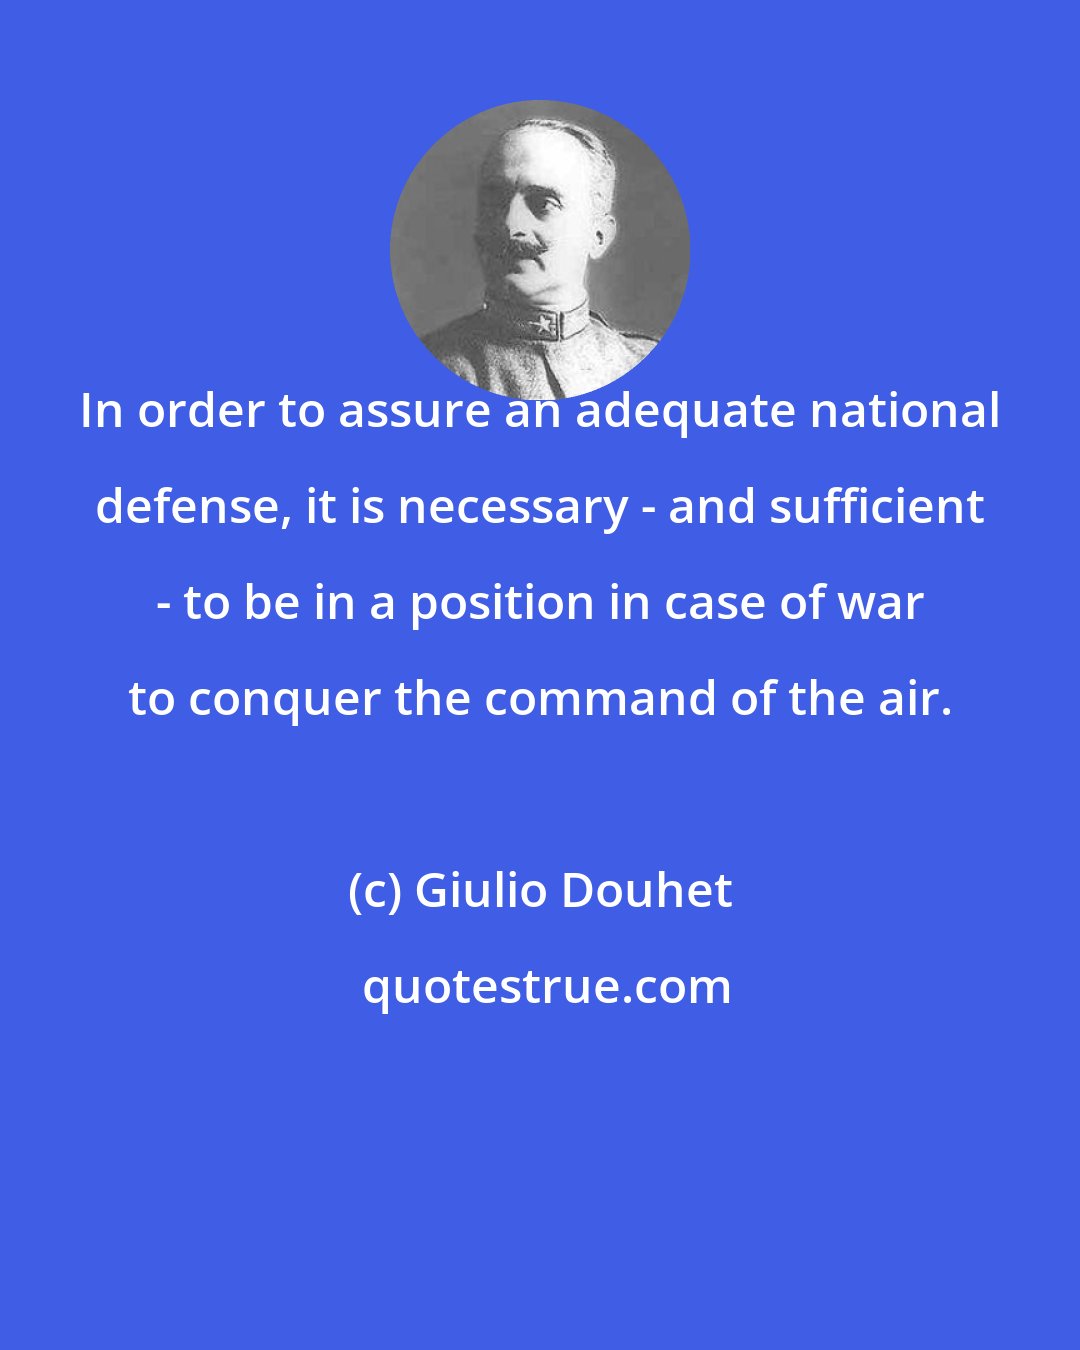 Giulio Douhet: In order to assure an adequate national defense, it is necessary - and sufficient - to be in a position in case of war to conquer the command of the air.